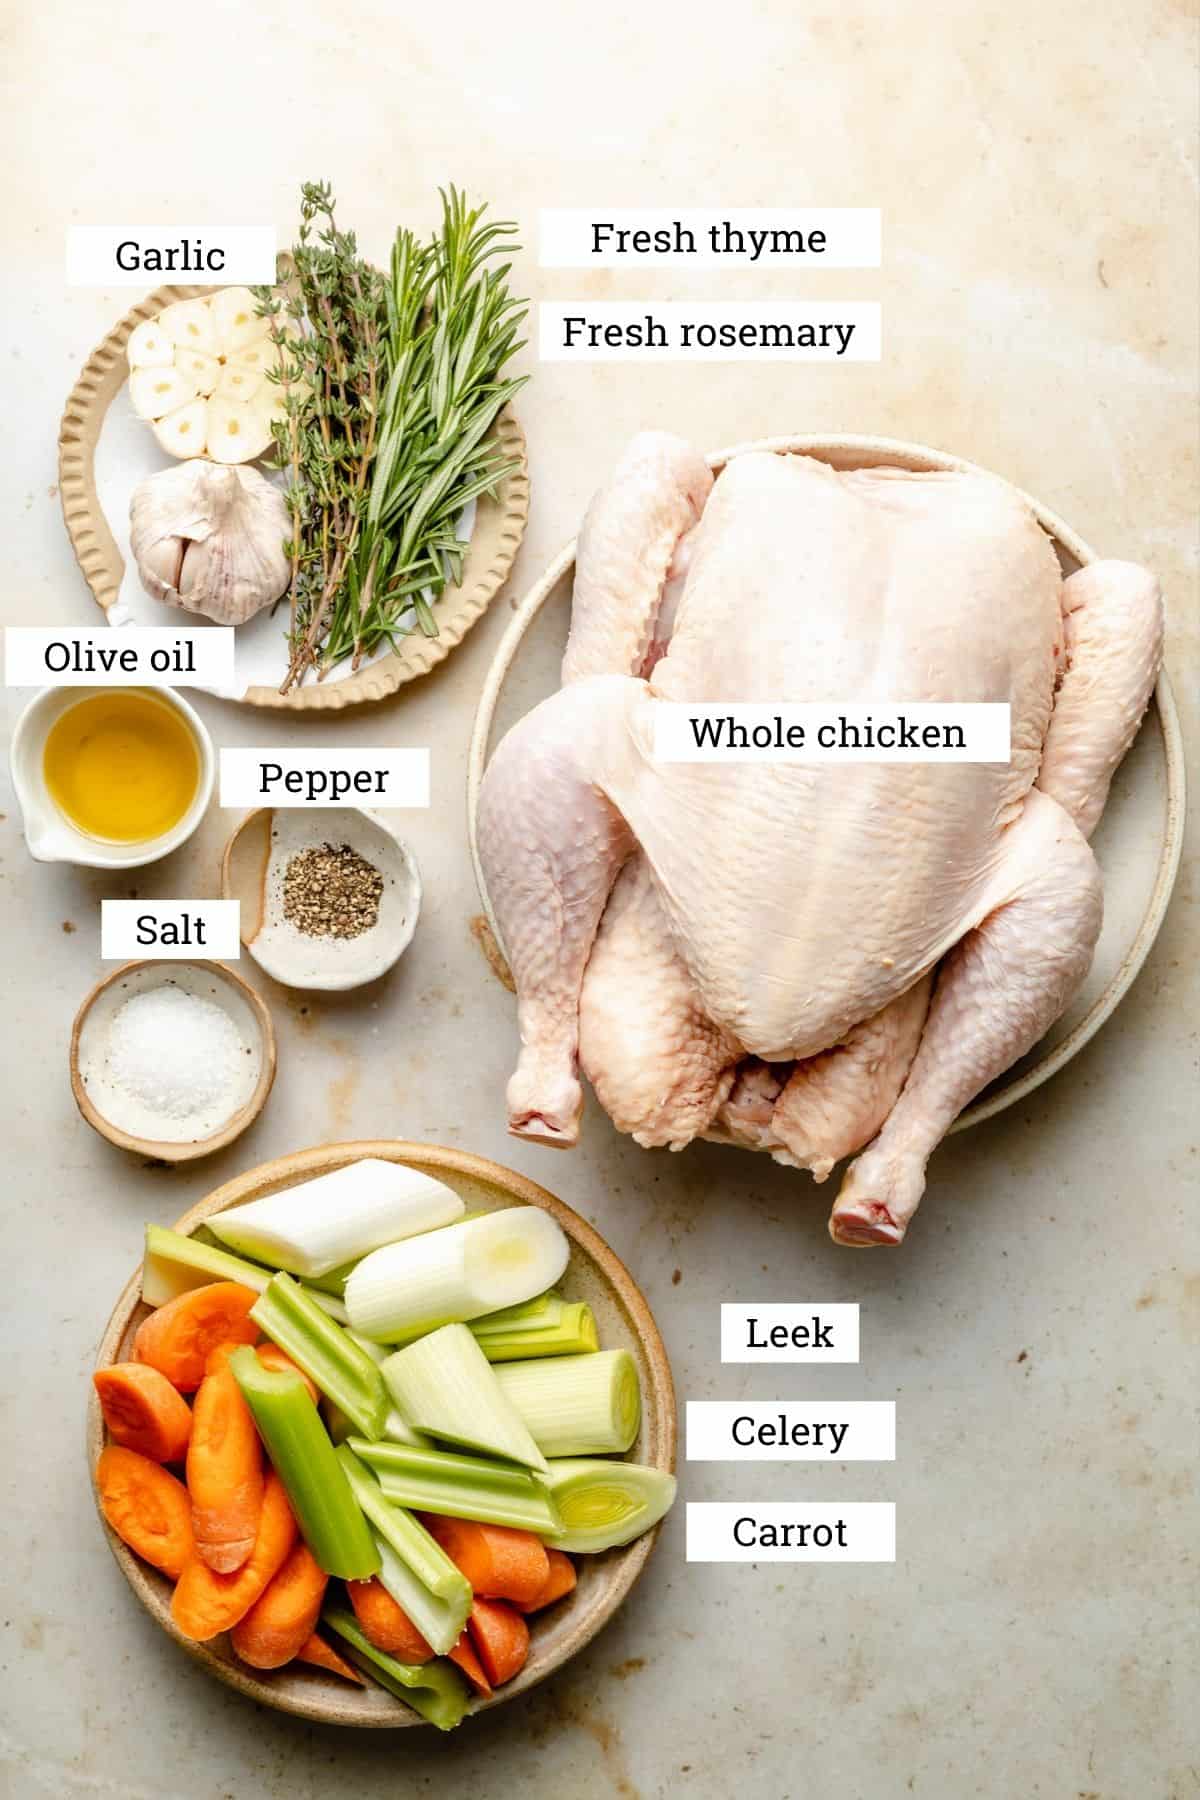 Ingredients in bowls: whole chicken, leek, celery, carrot, garlic, rosemary, thyme, oil, salt and pepper.